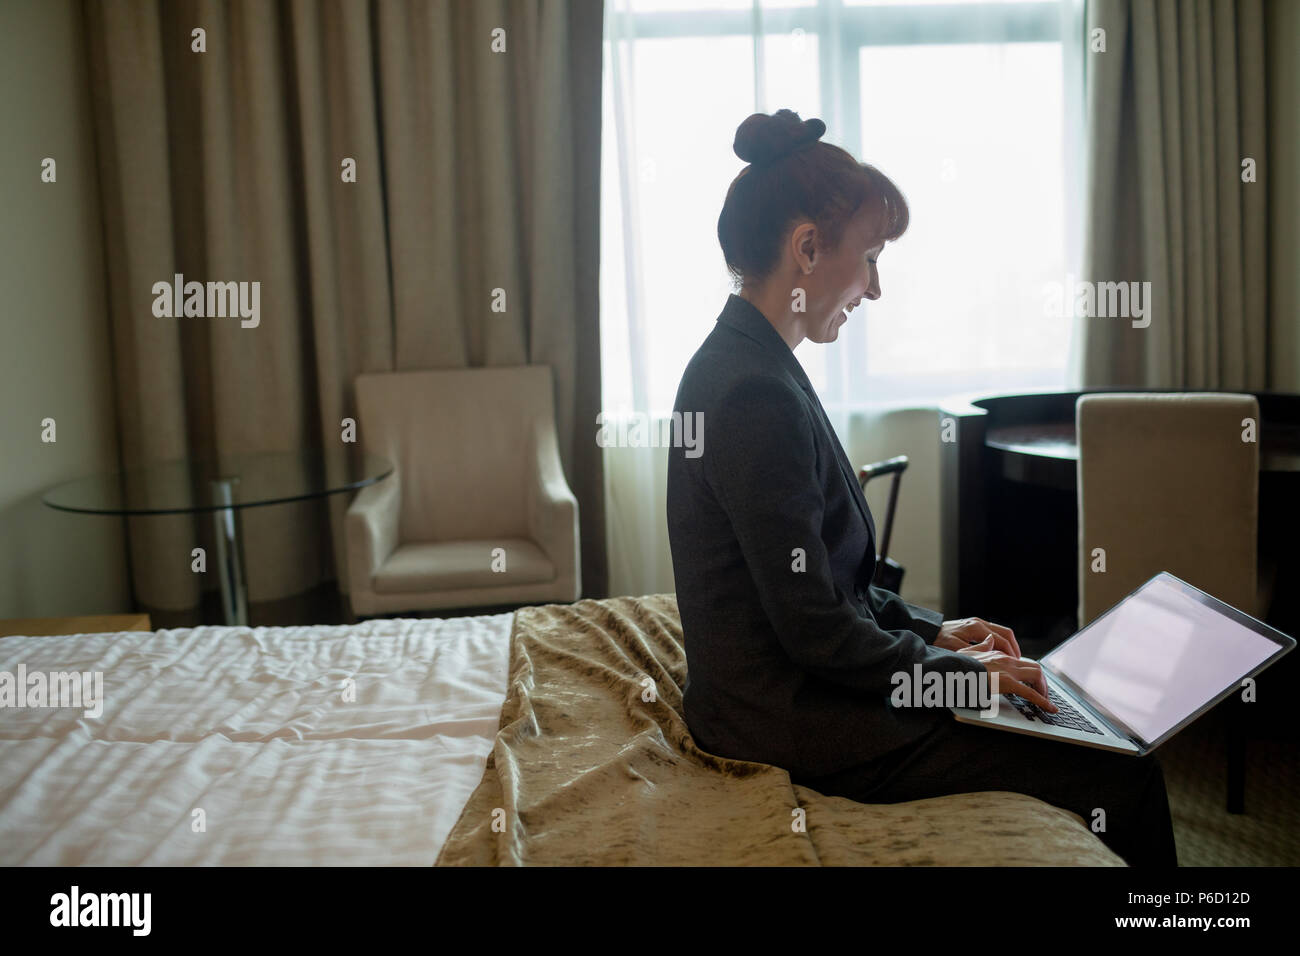 Businesswoman using laptop on bed Banque D'Images